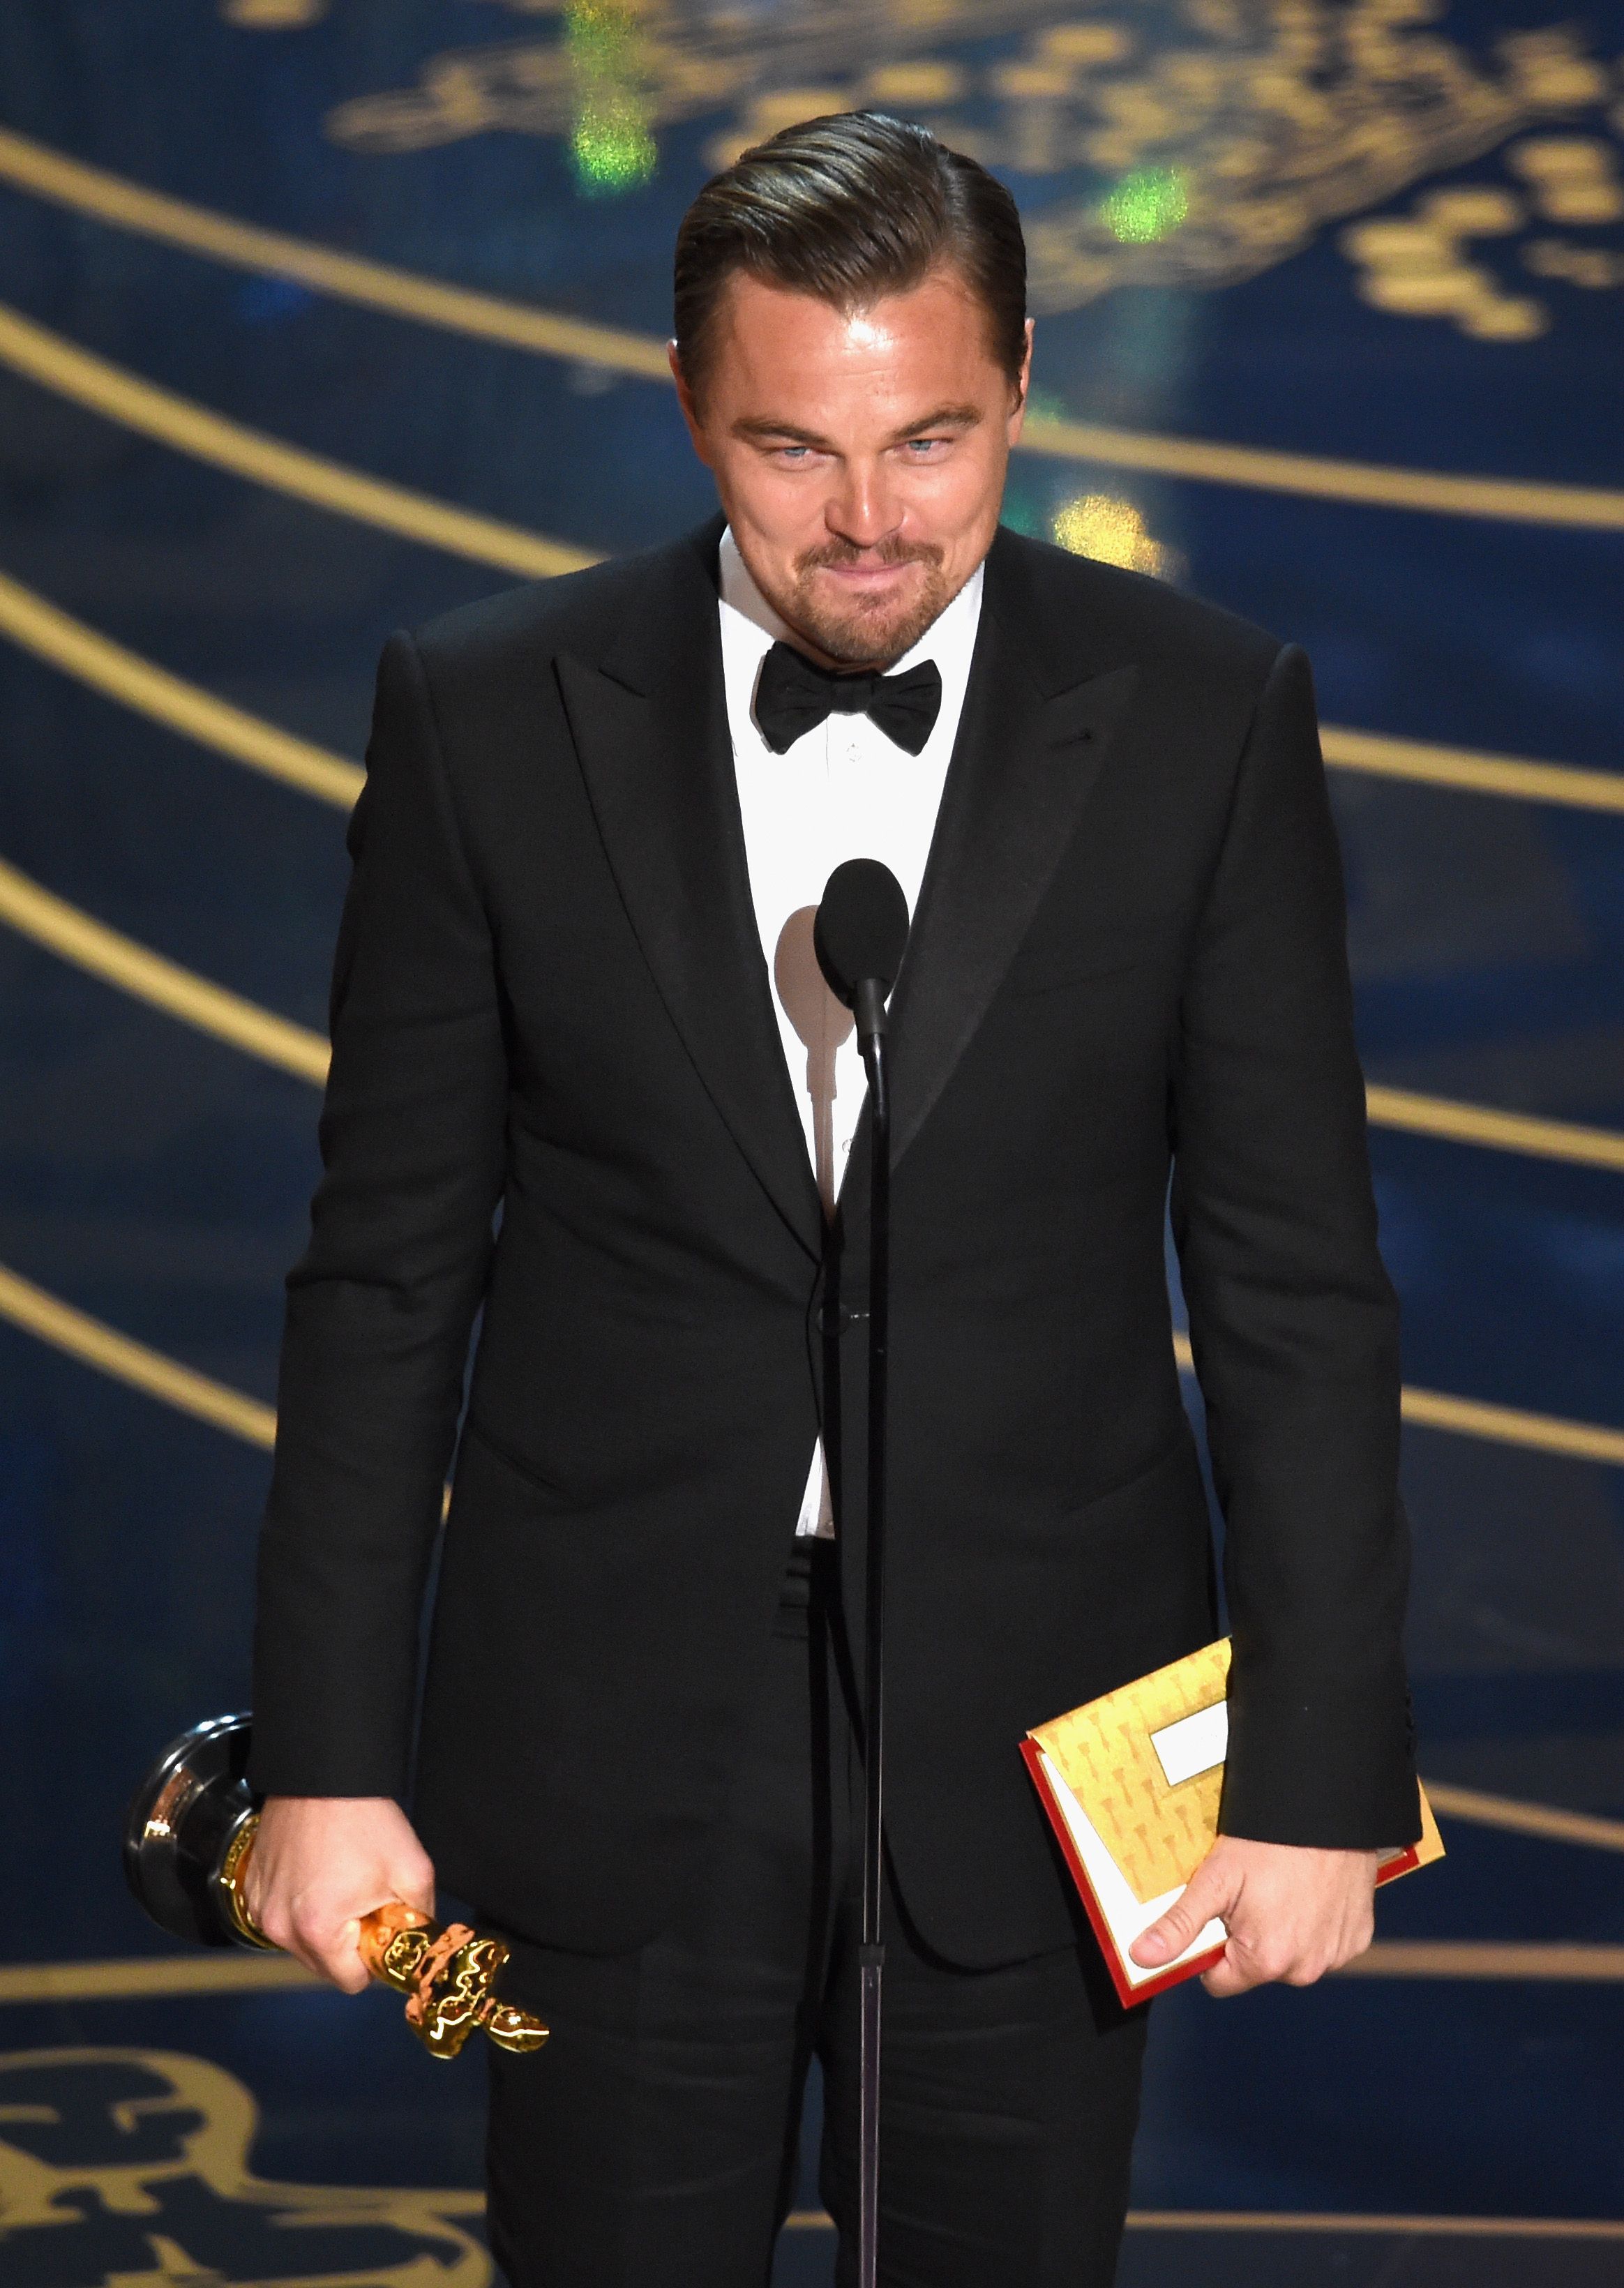 HOLLYWOOD, CA - FEBRUARY 28: Actor Leonardo DiCaprio accepts the Best Actor award for 'The Revenant' onstage during the 88th Annual Academy Awards at the Dolby Theatre on February 28, 2016 in Hollywood, California. (Photo by Kevin Winter/Getty Images)